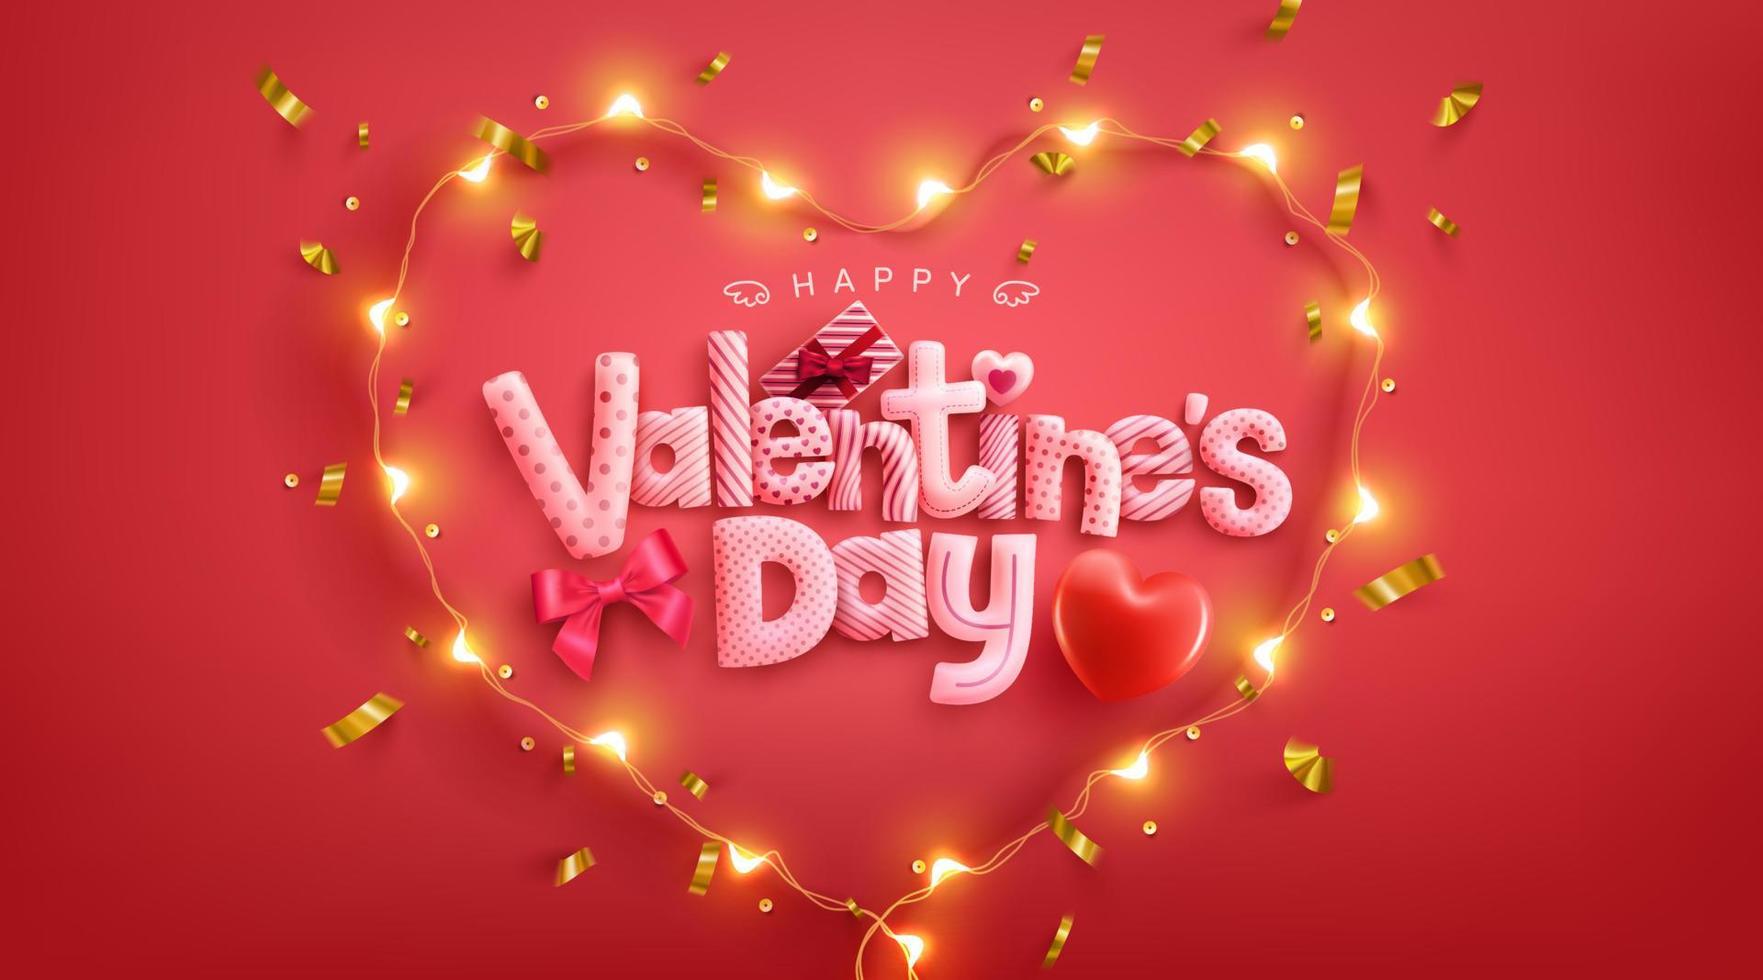 Happy Valentine's Day Poster or banner by cute font in heart shape with LED lights frame. Promotion and shopping template or background for Love and Valentine's day concept vector